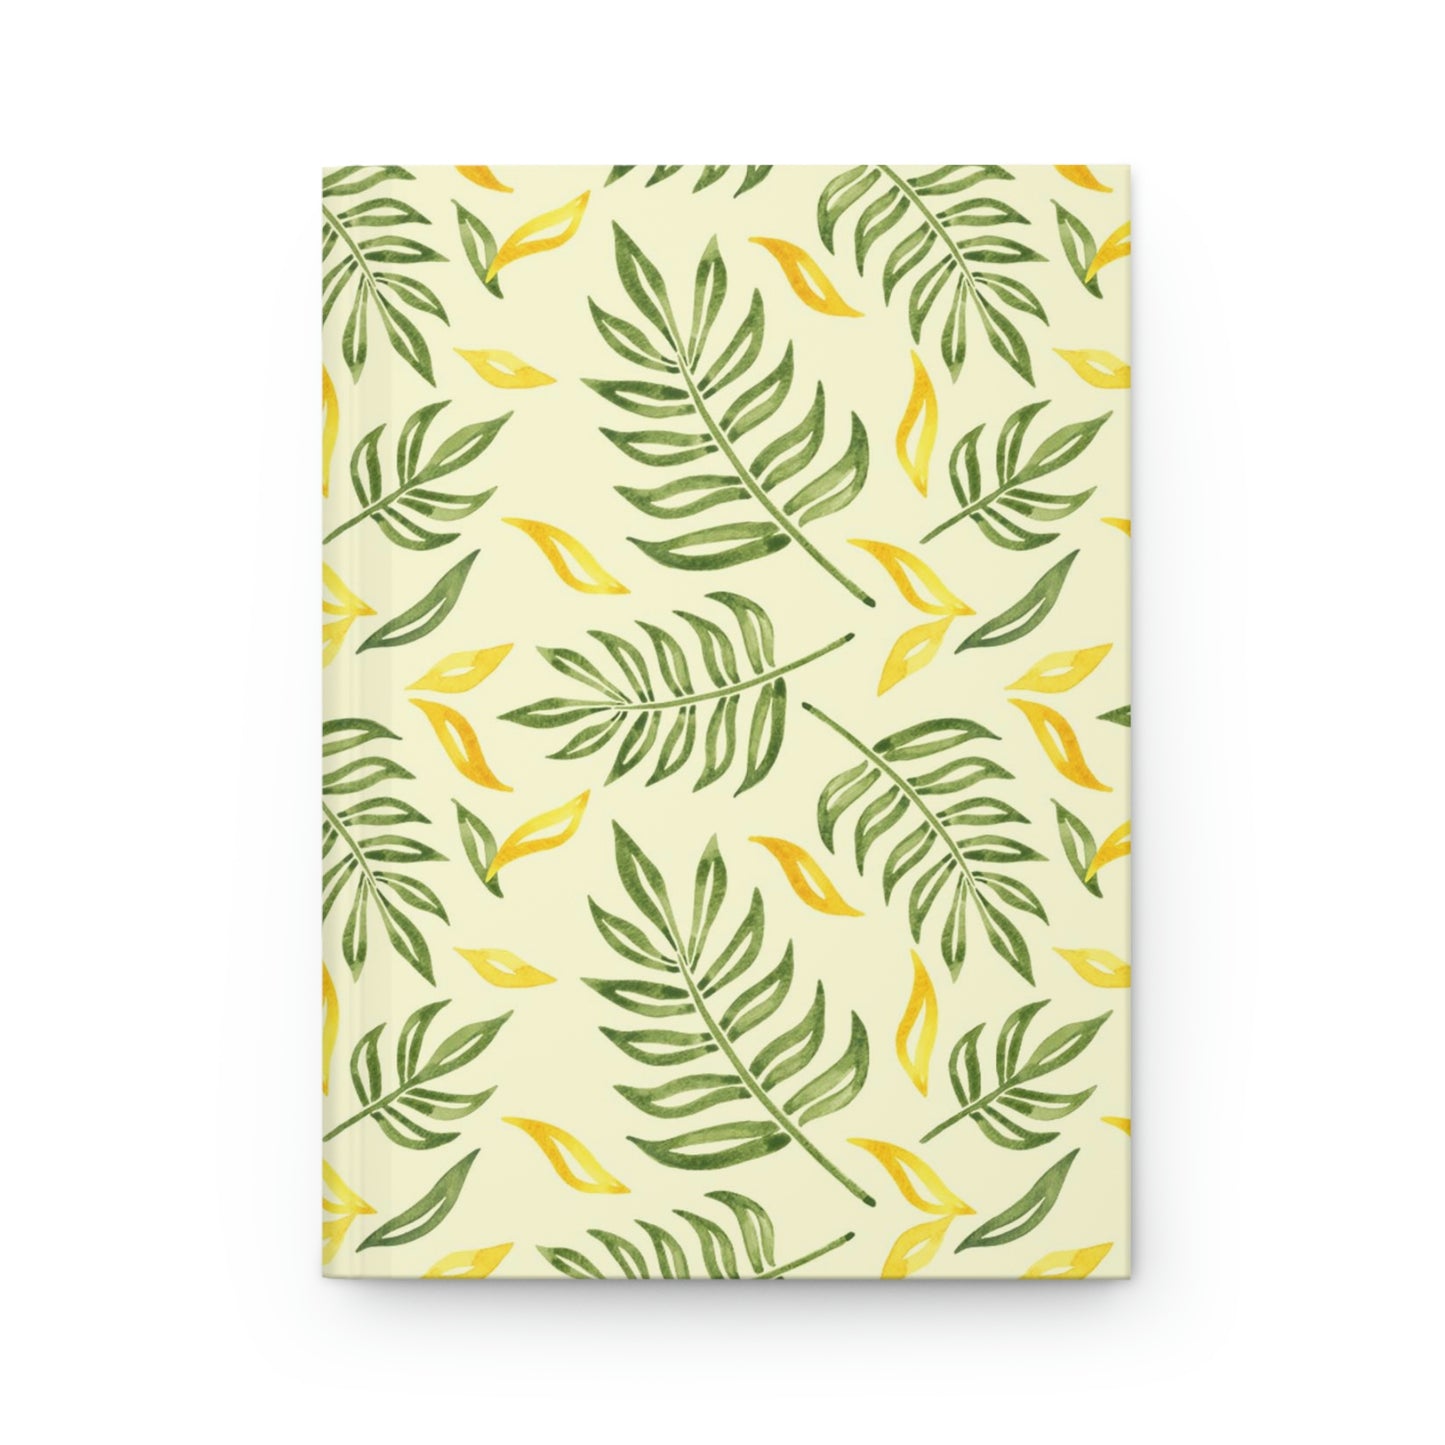 Yoga Journal - Yellow and Green Leaves Hardcover Journal Matte